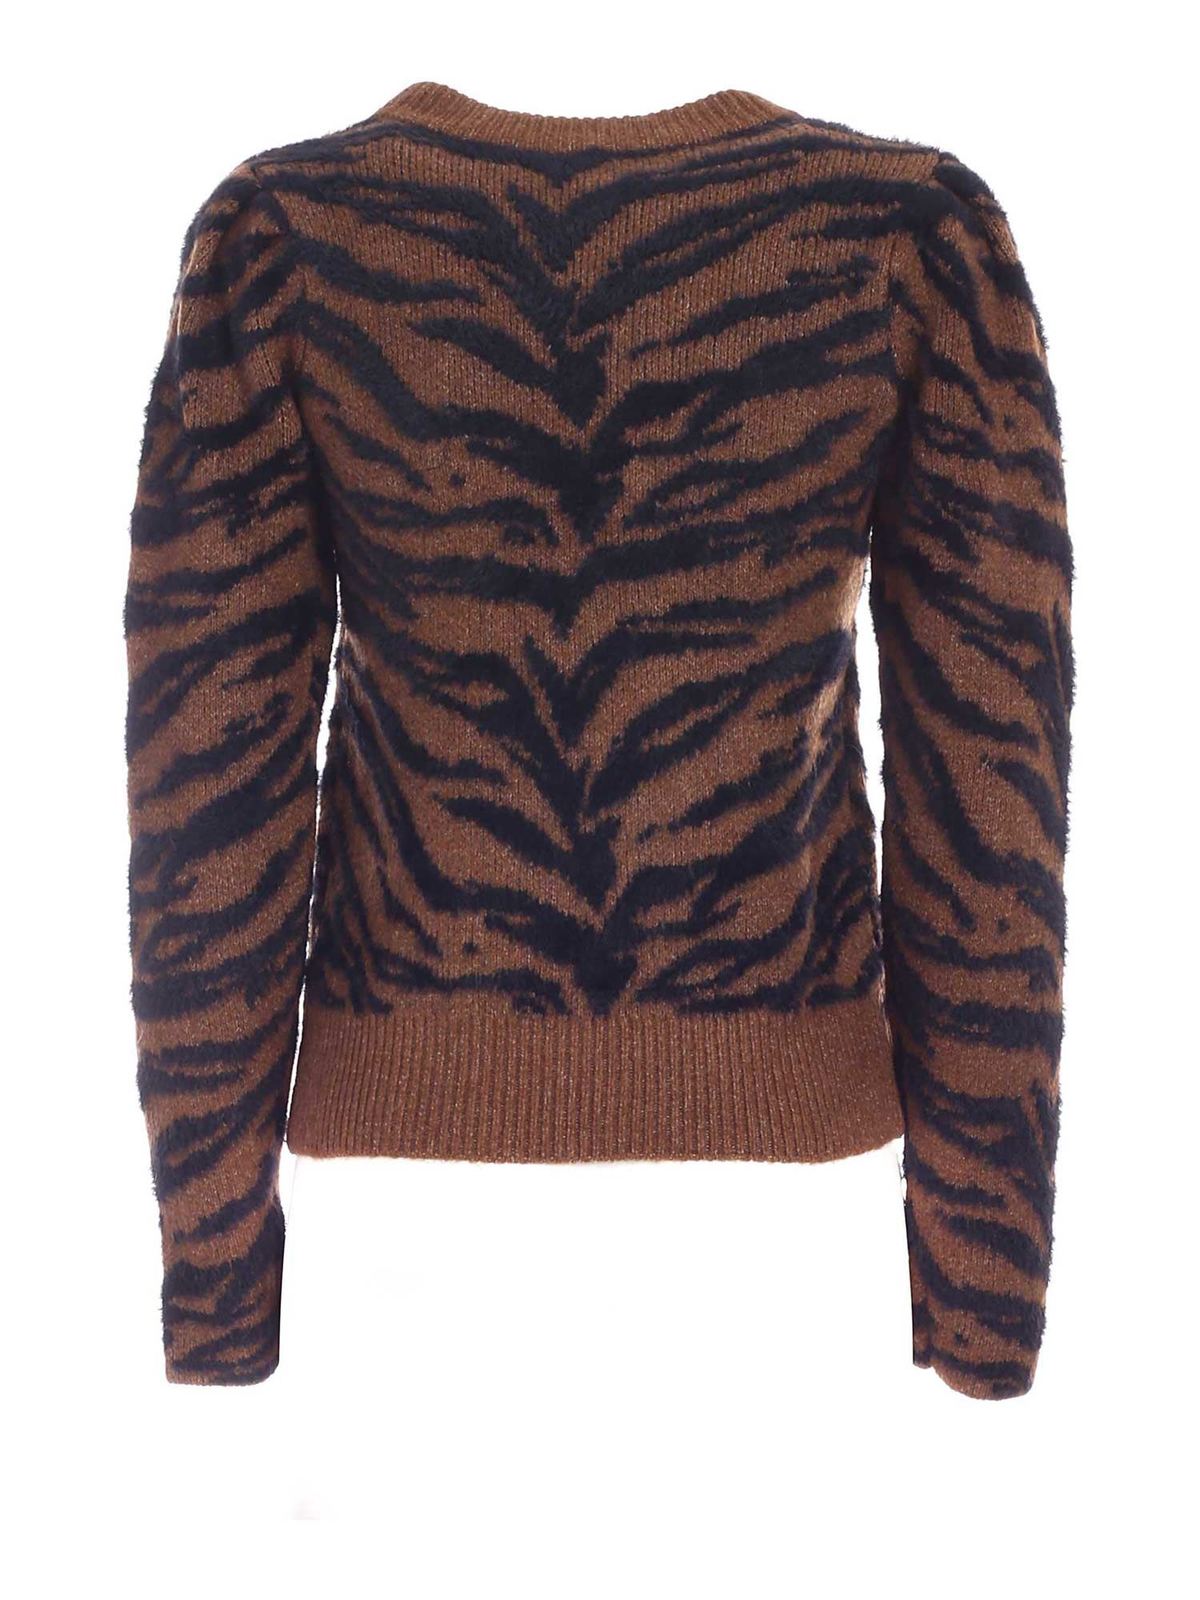 Shop Dkny Striped Sweater In Brown And Black In Animal Print